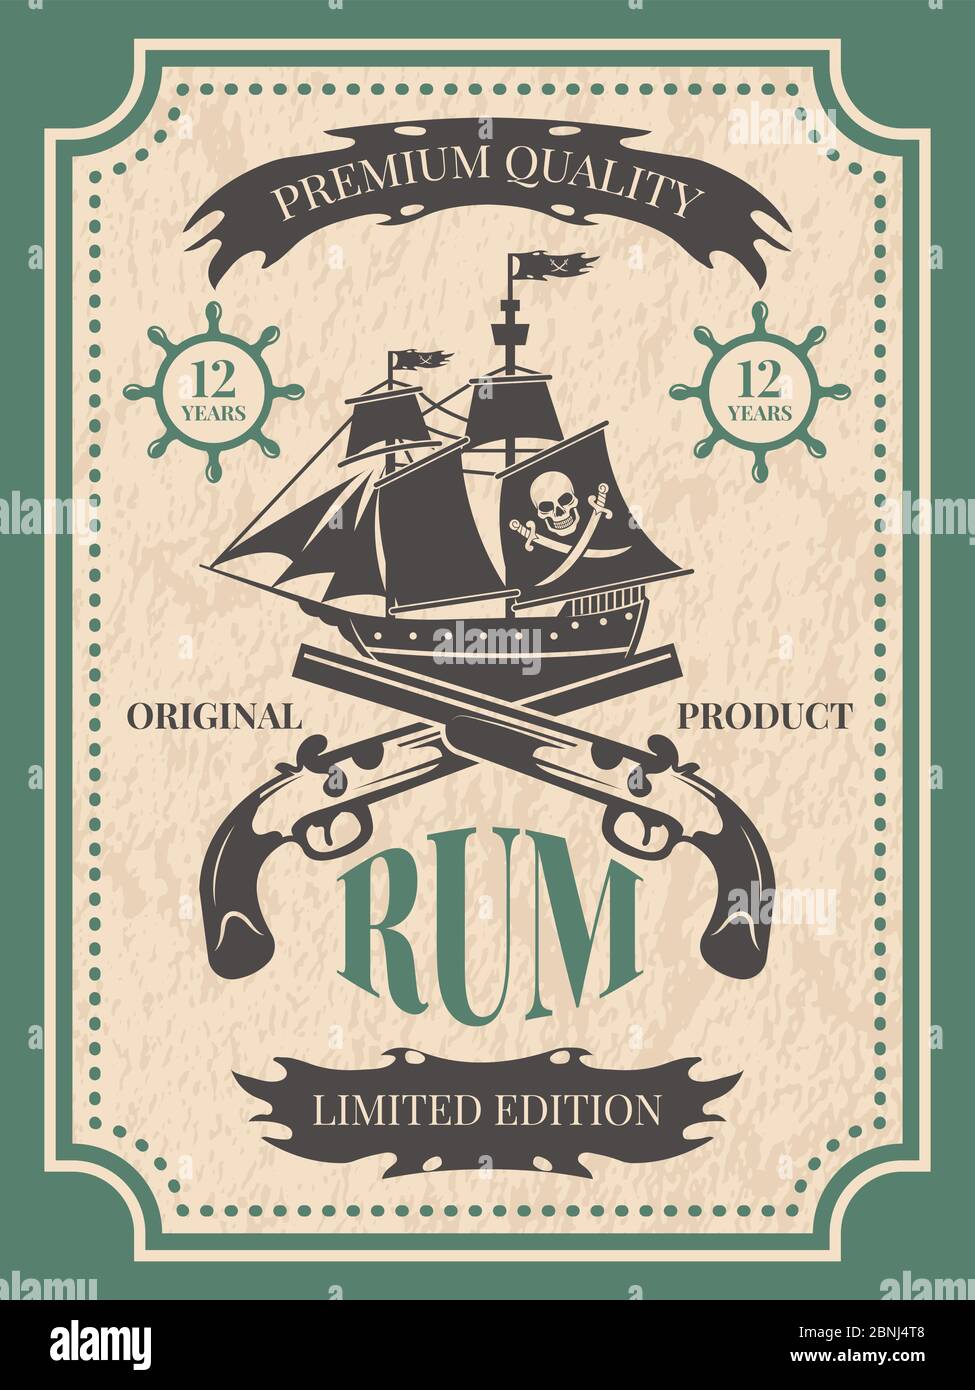 Rum. Vintage label at pirate theme Stock Vector